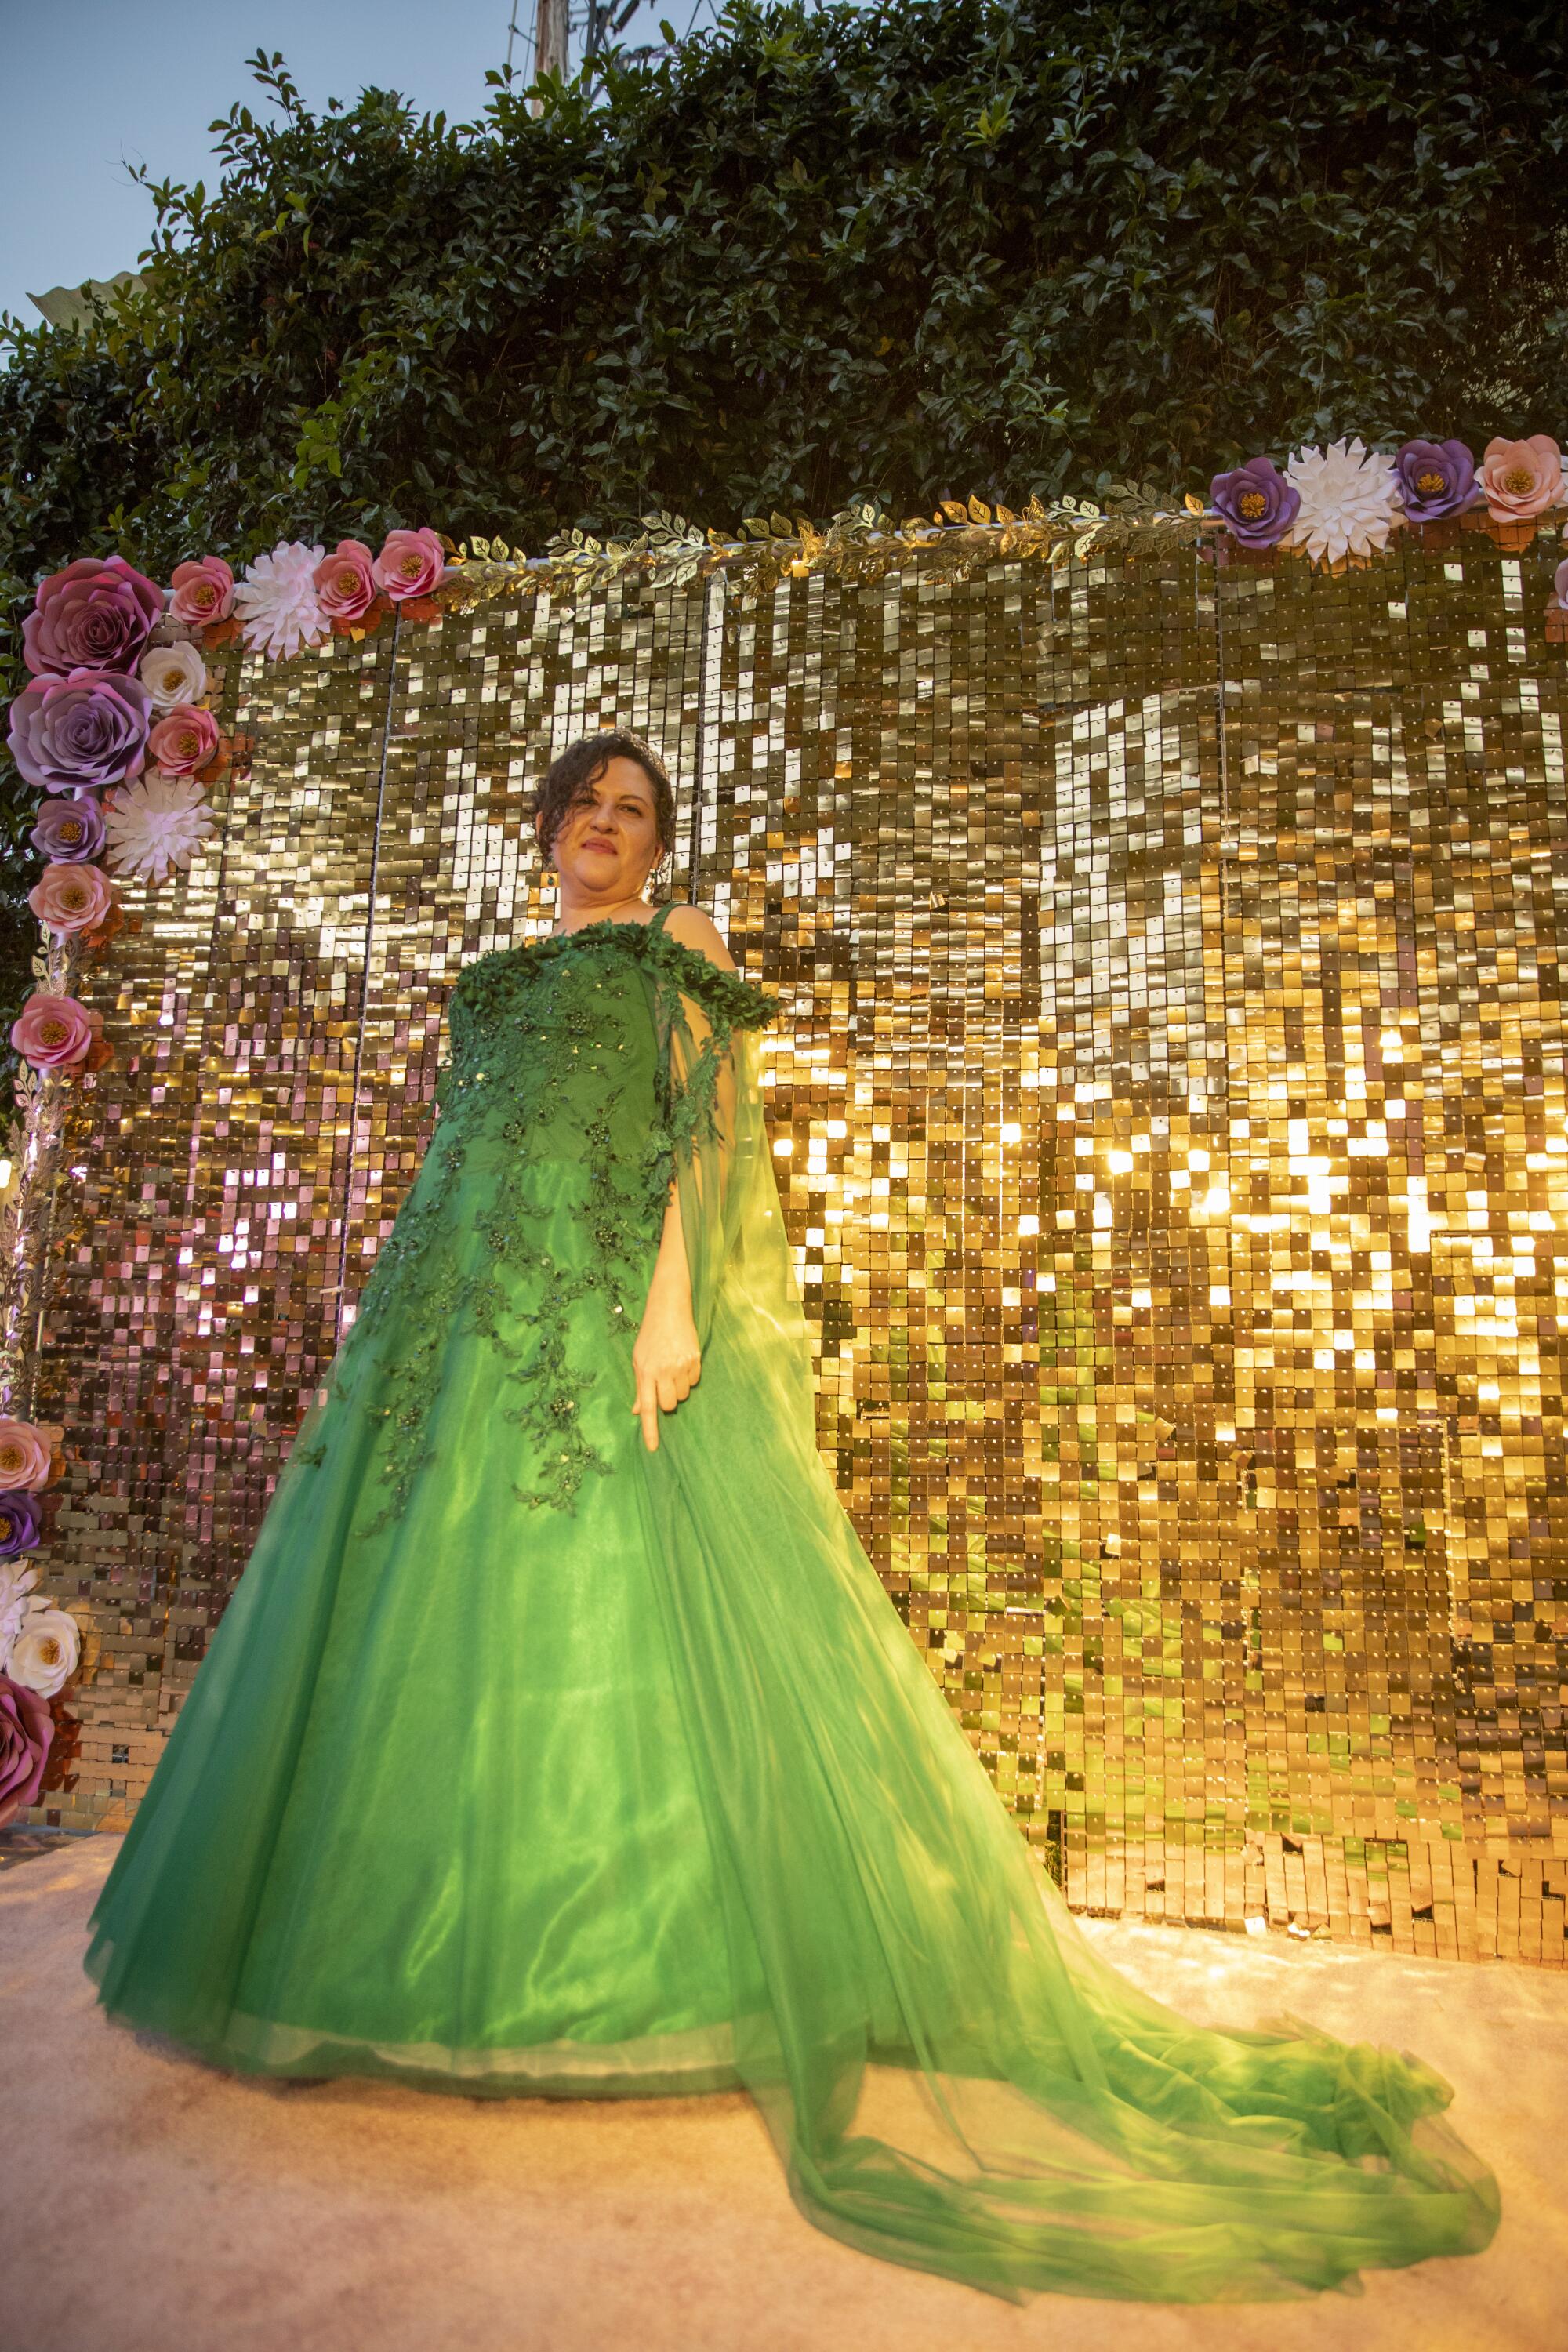 Cruz poses for a photo wearing a green dress in front of a glitter backdrop